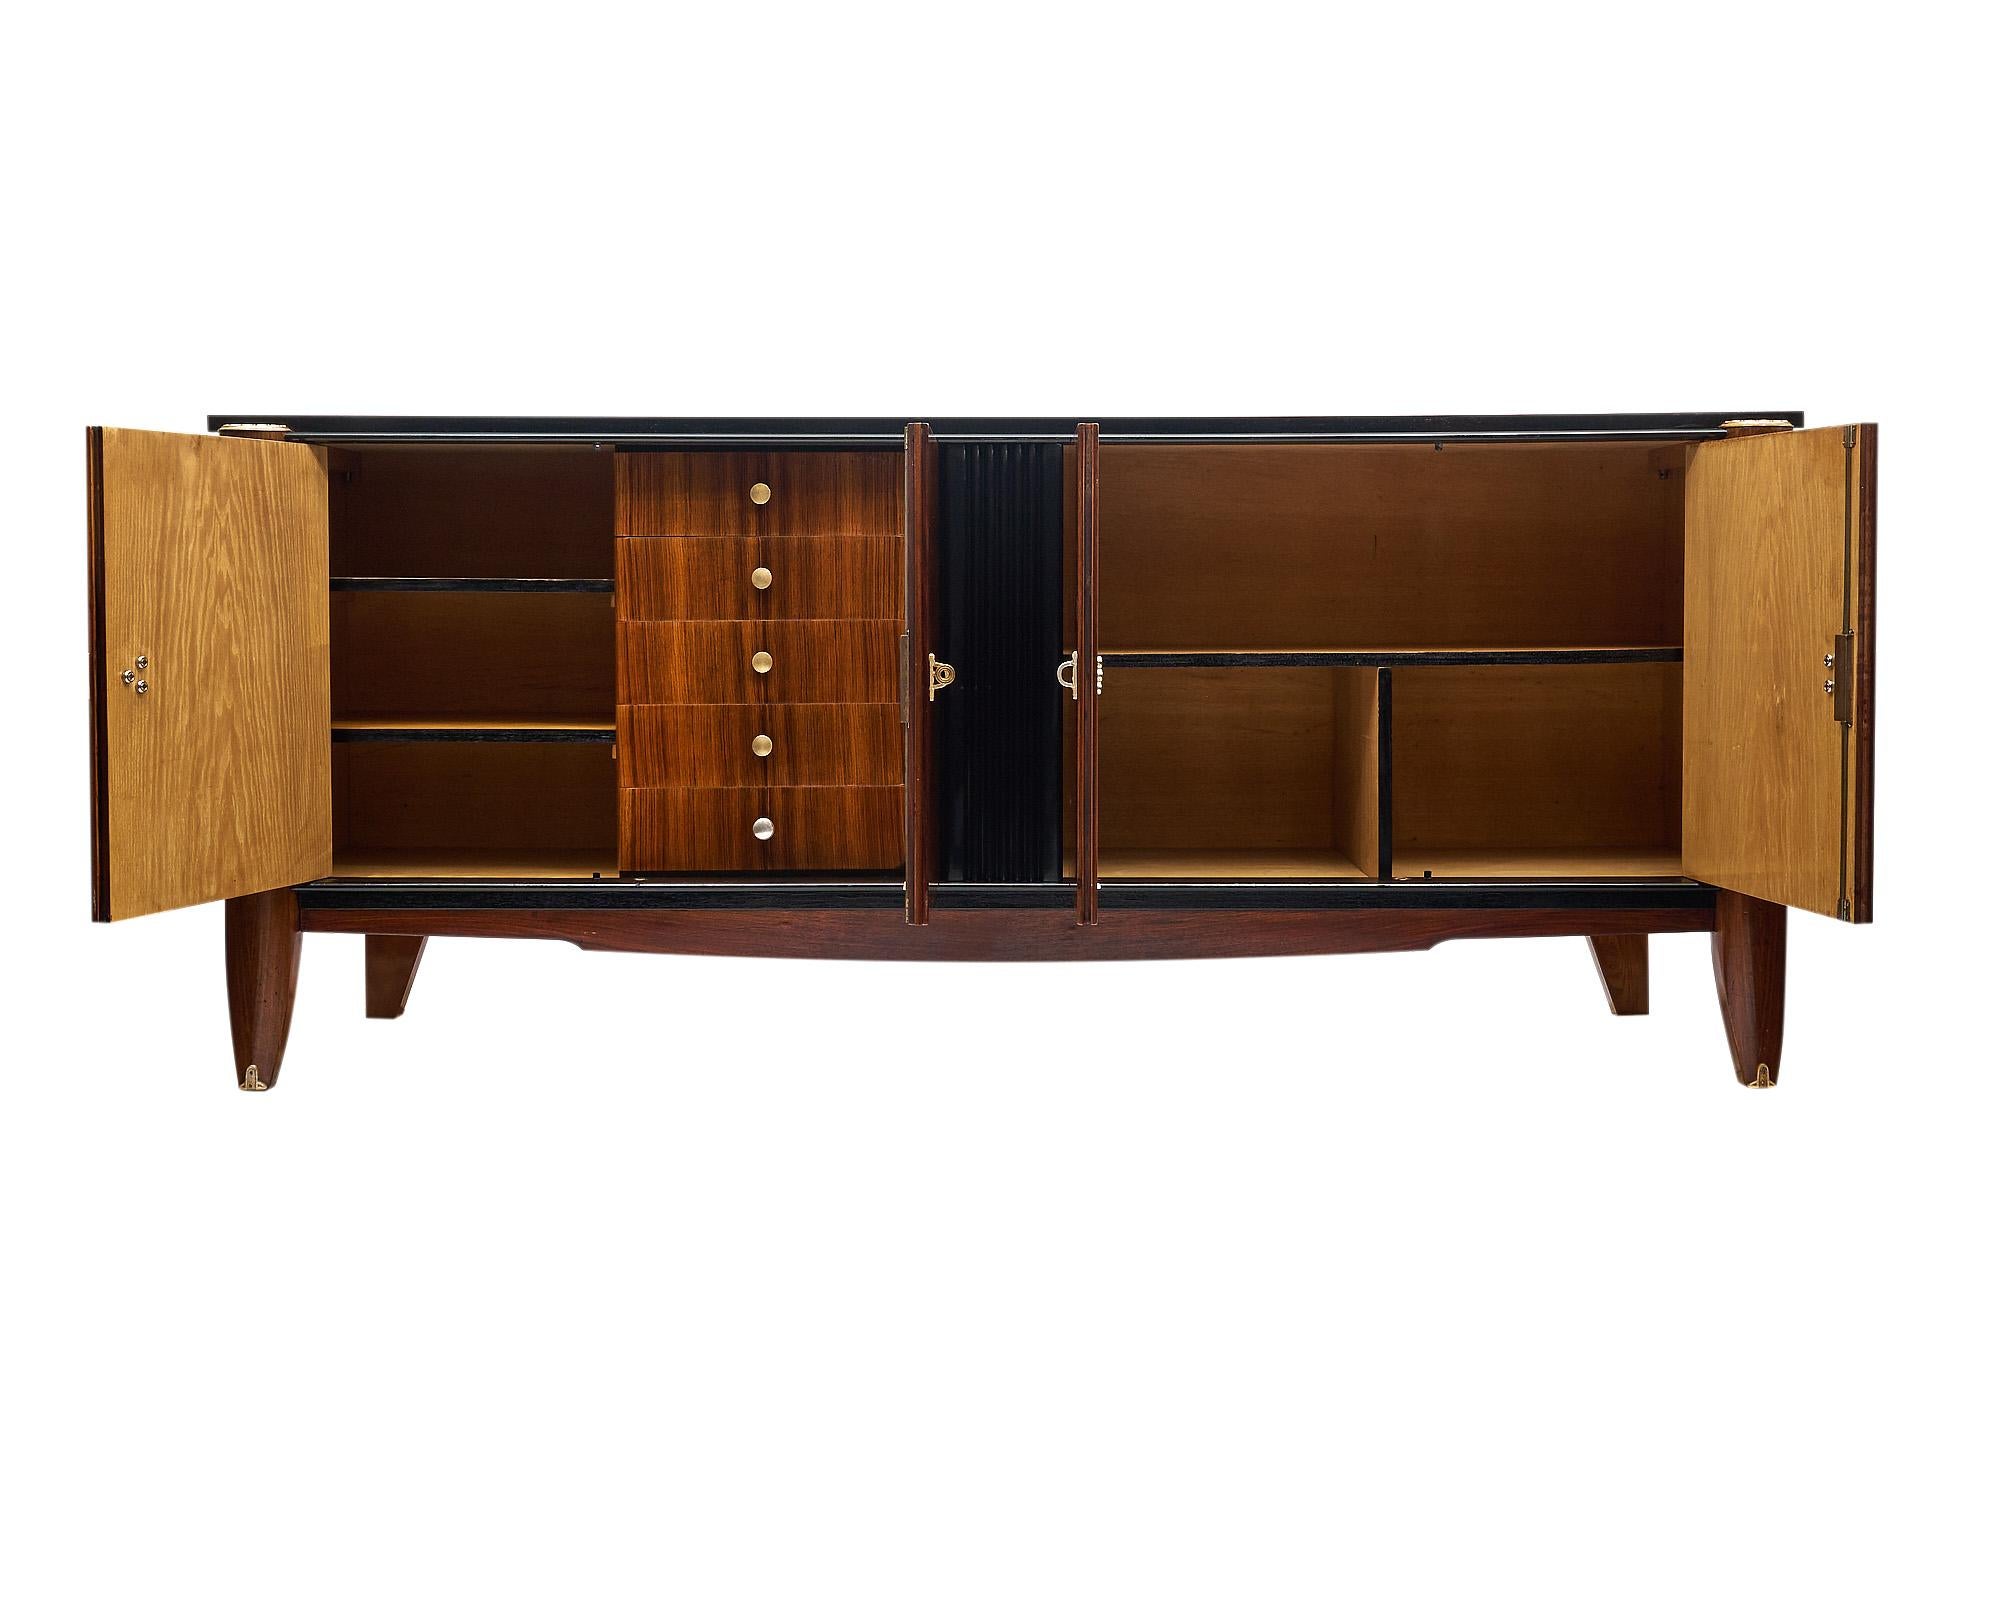 Mid-20th Century French Art Deco Buffet For Sale